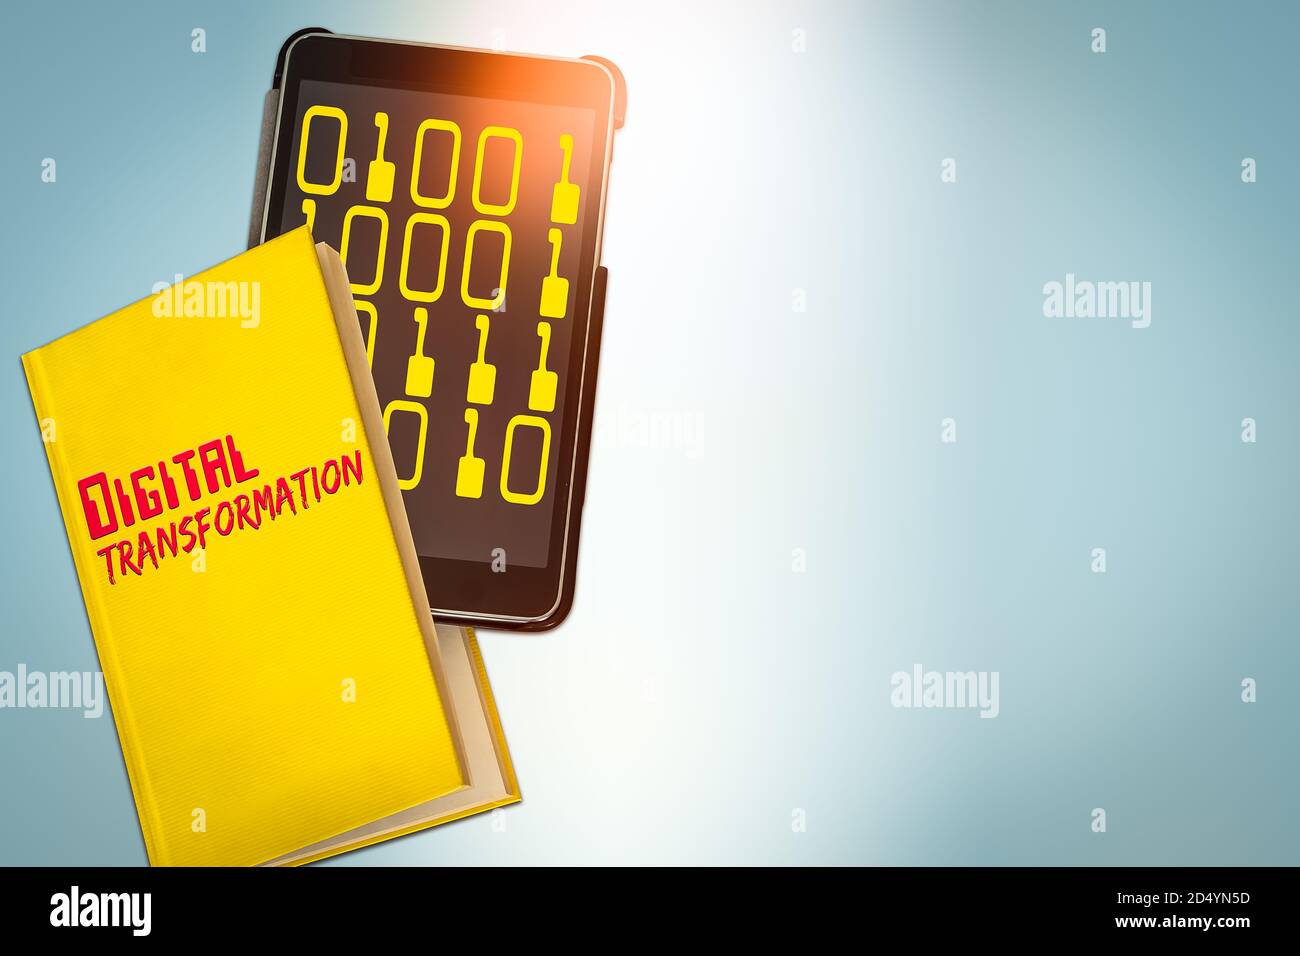 Image of Yellow Book and a Tablet Computer showing the Text Transformation Stock Photo